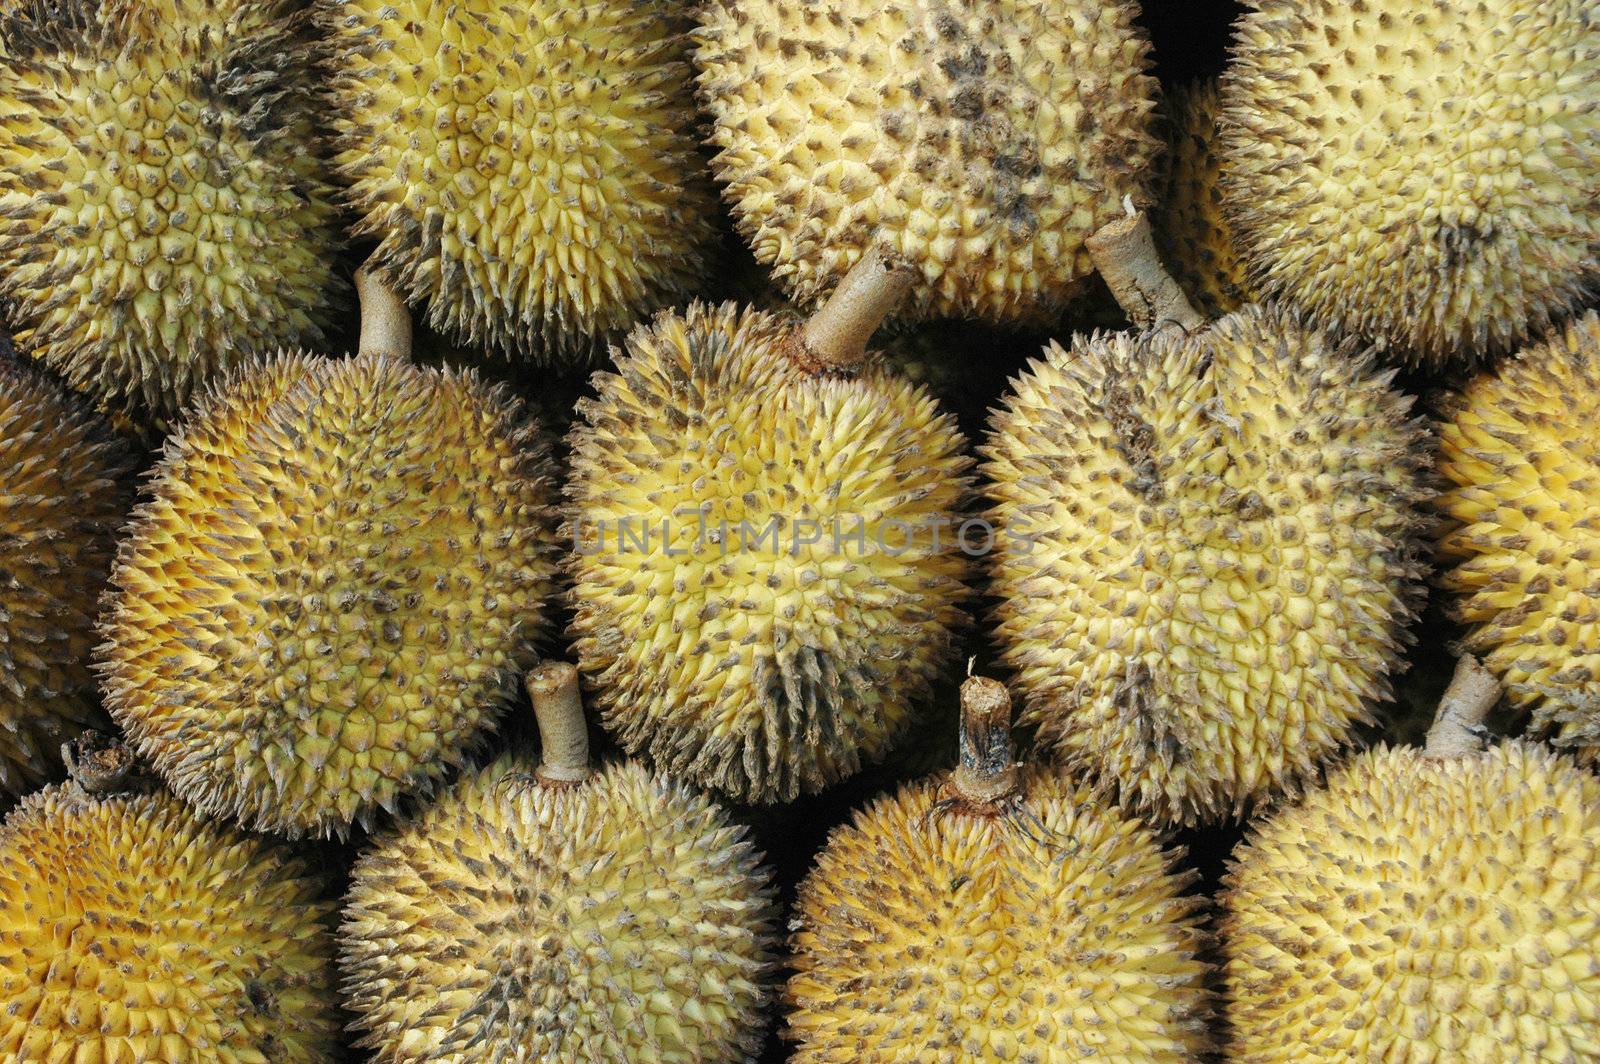 tropical fruits like durian fruit, with smaller size and yellow tropical fruit that is found only in Borneo Indonesia